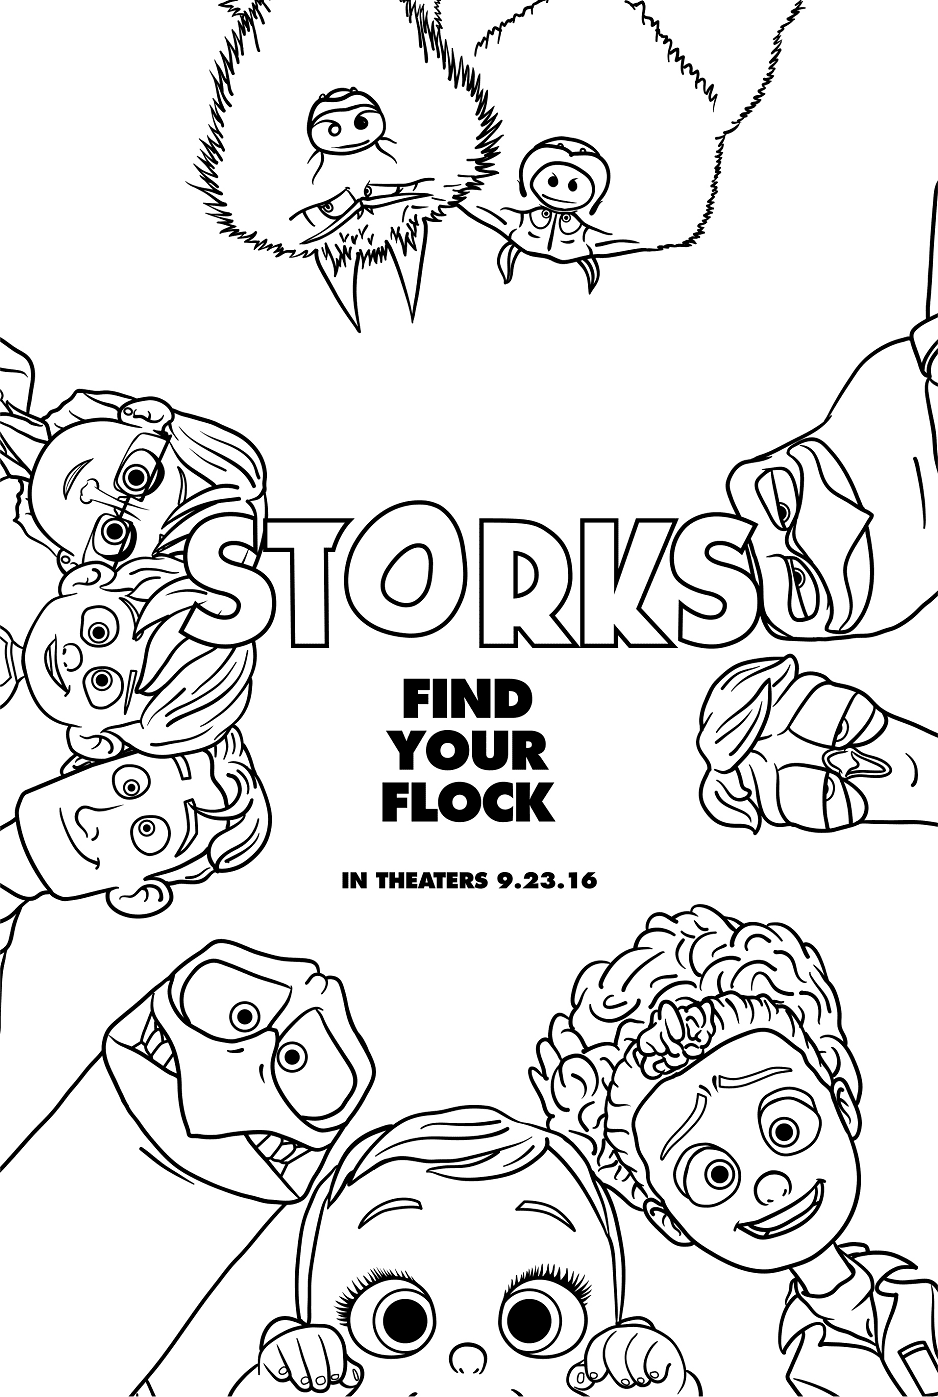 Storks Find Your Flock Coloring Page